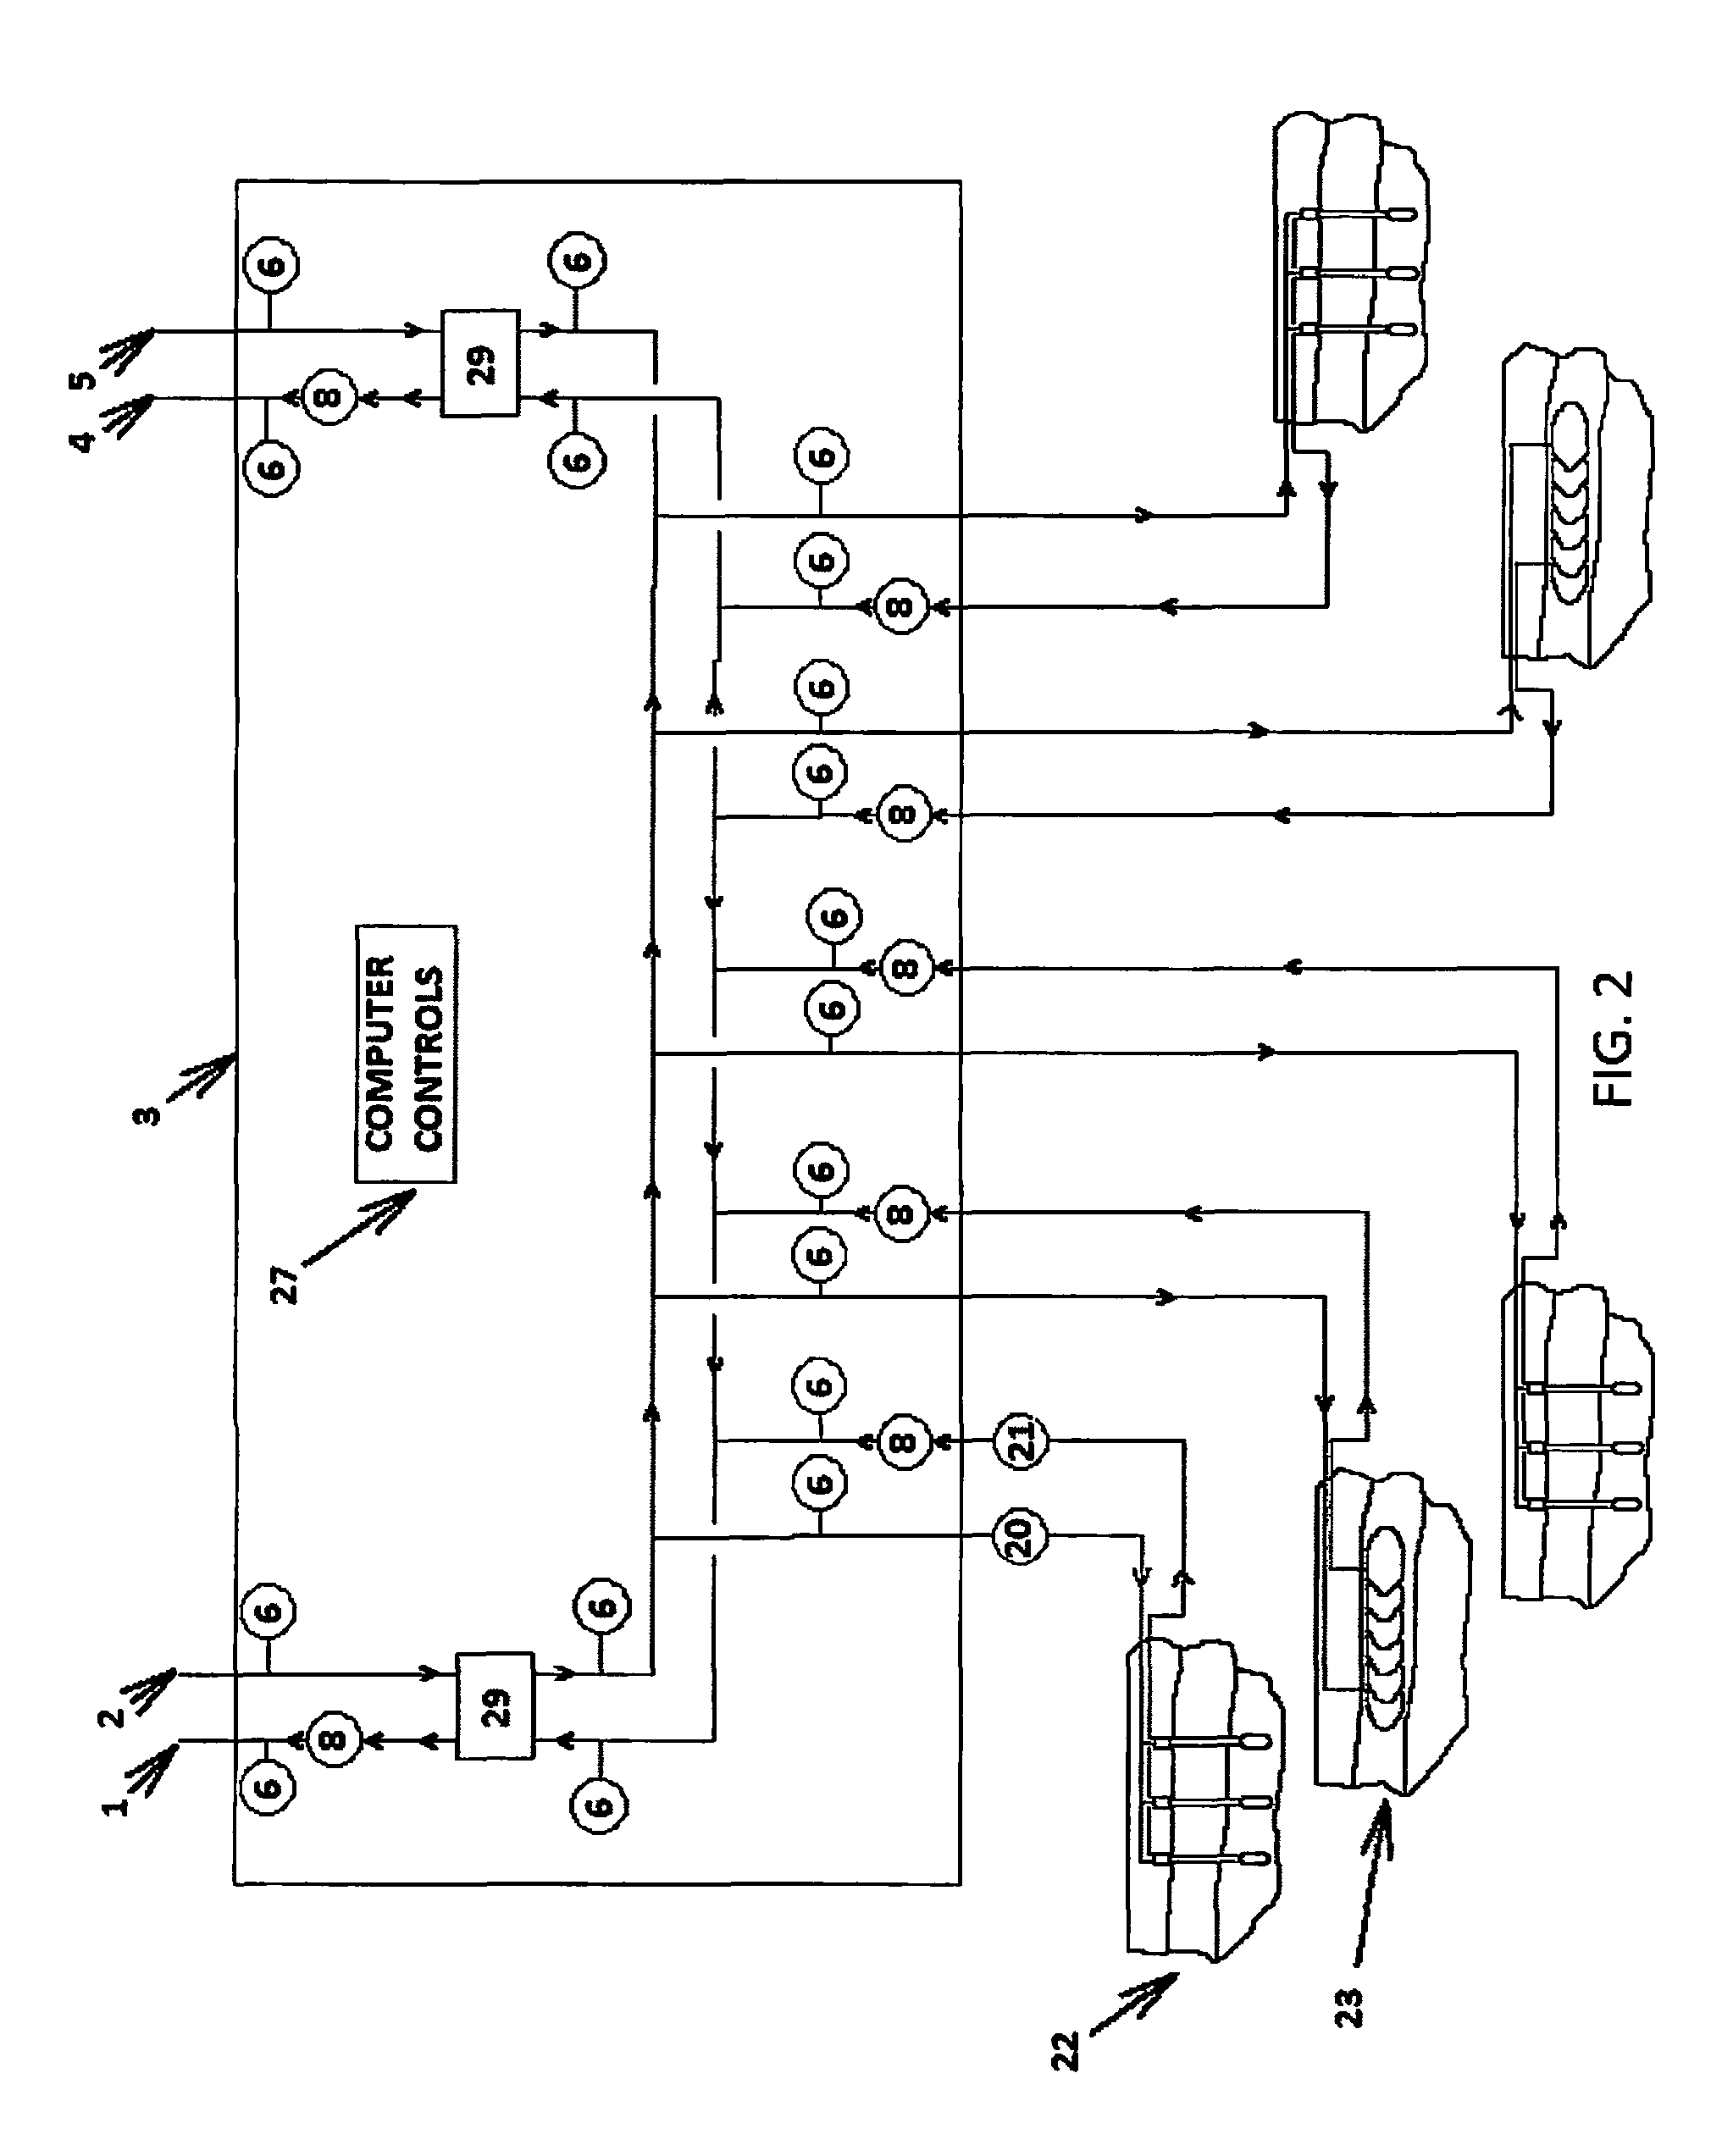 Energy chassis and energy exchange device